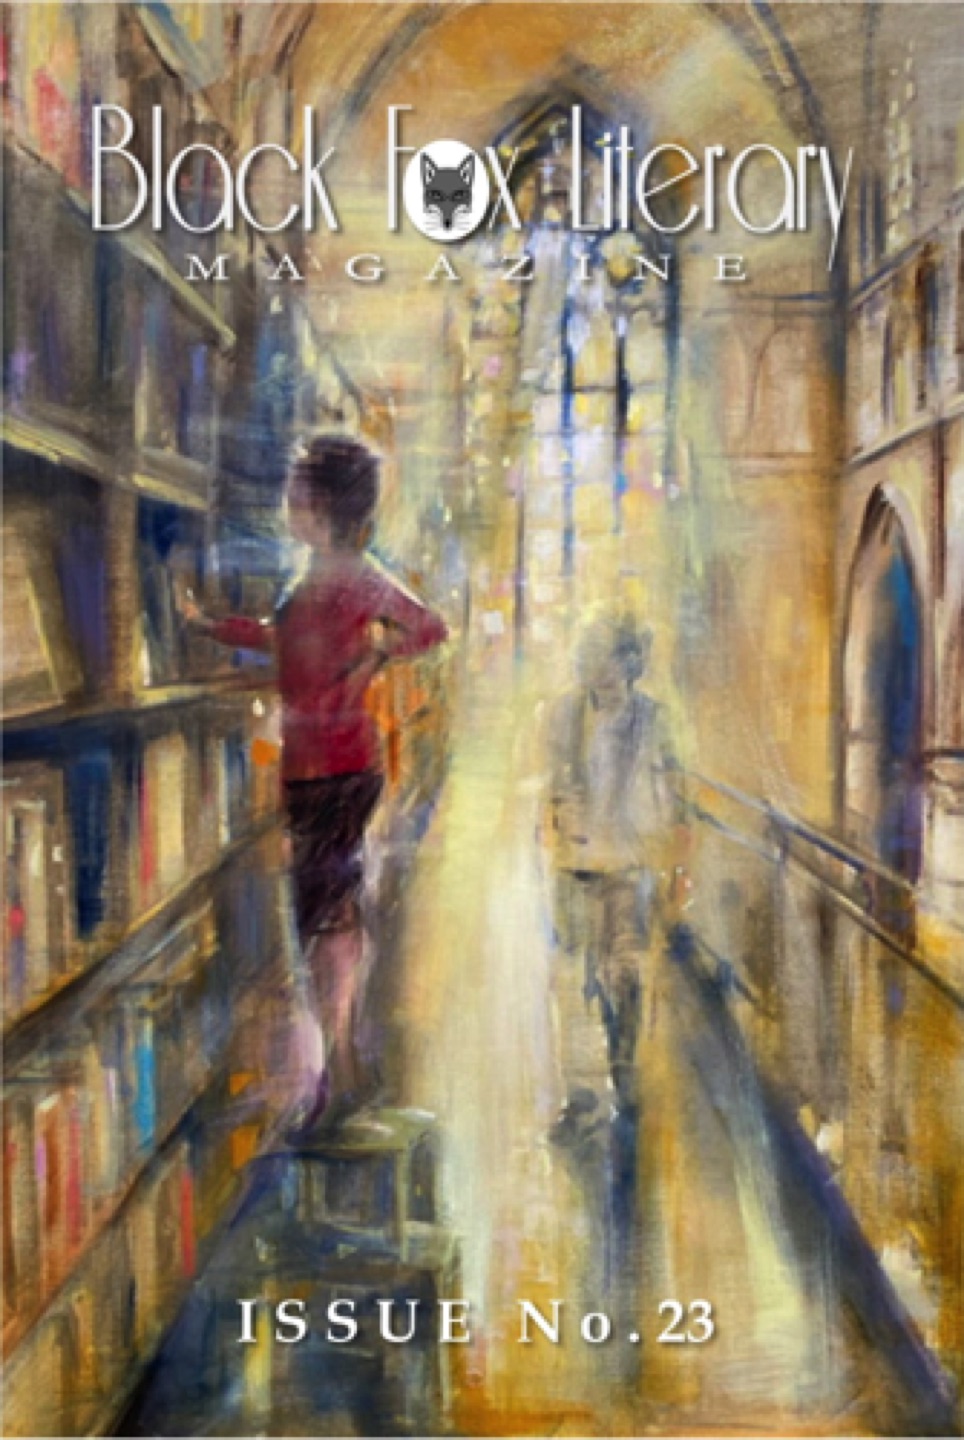 Gregg Chadwick’s Painting "Carpe Librum" Featured on the Cover of Black Fox Literary Magazine, Issue No. 23